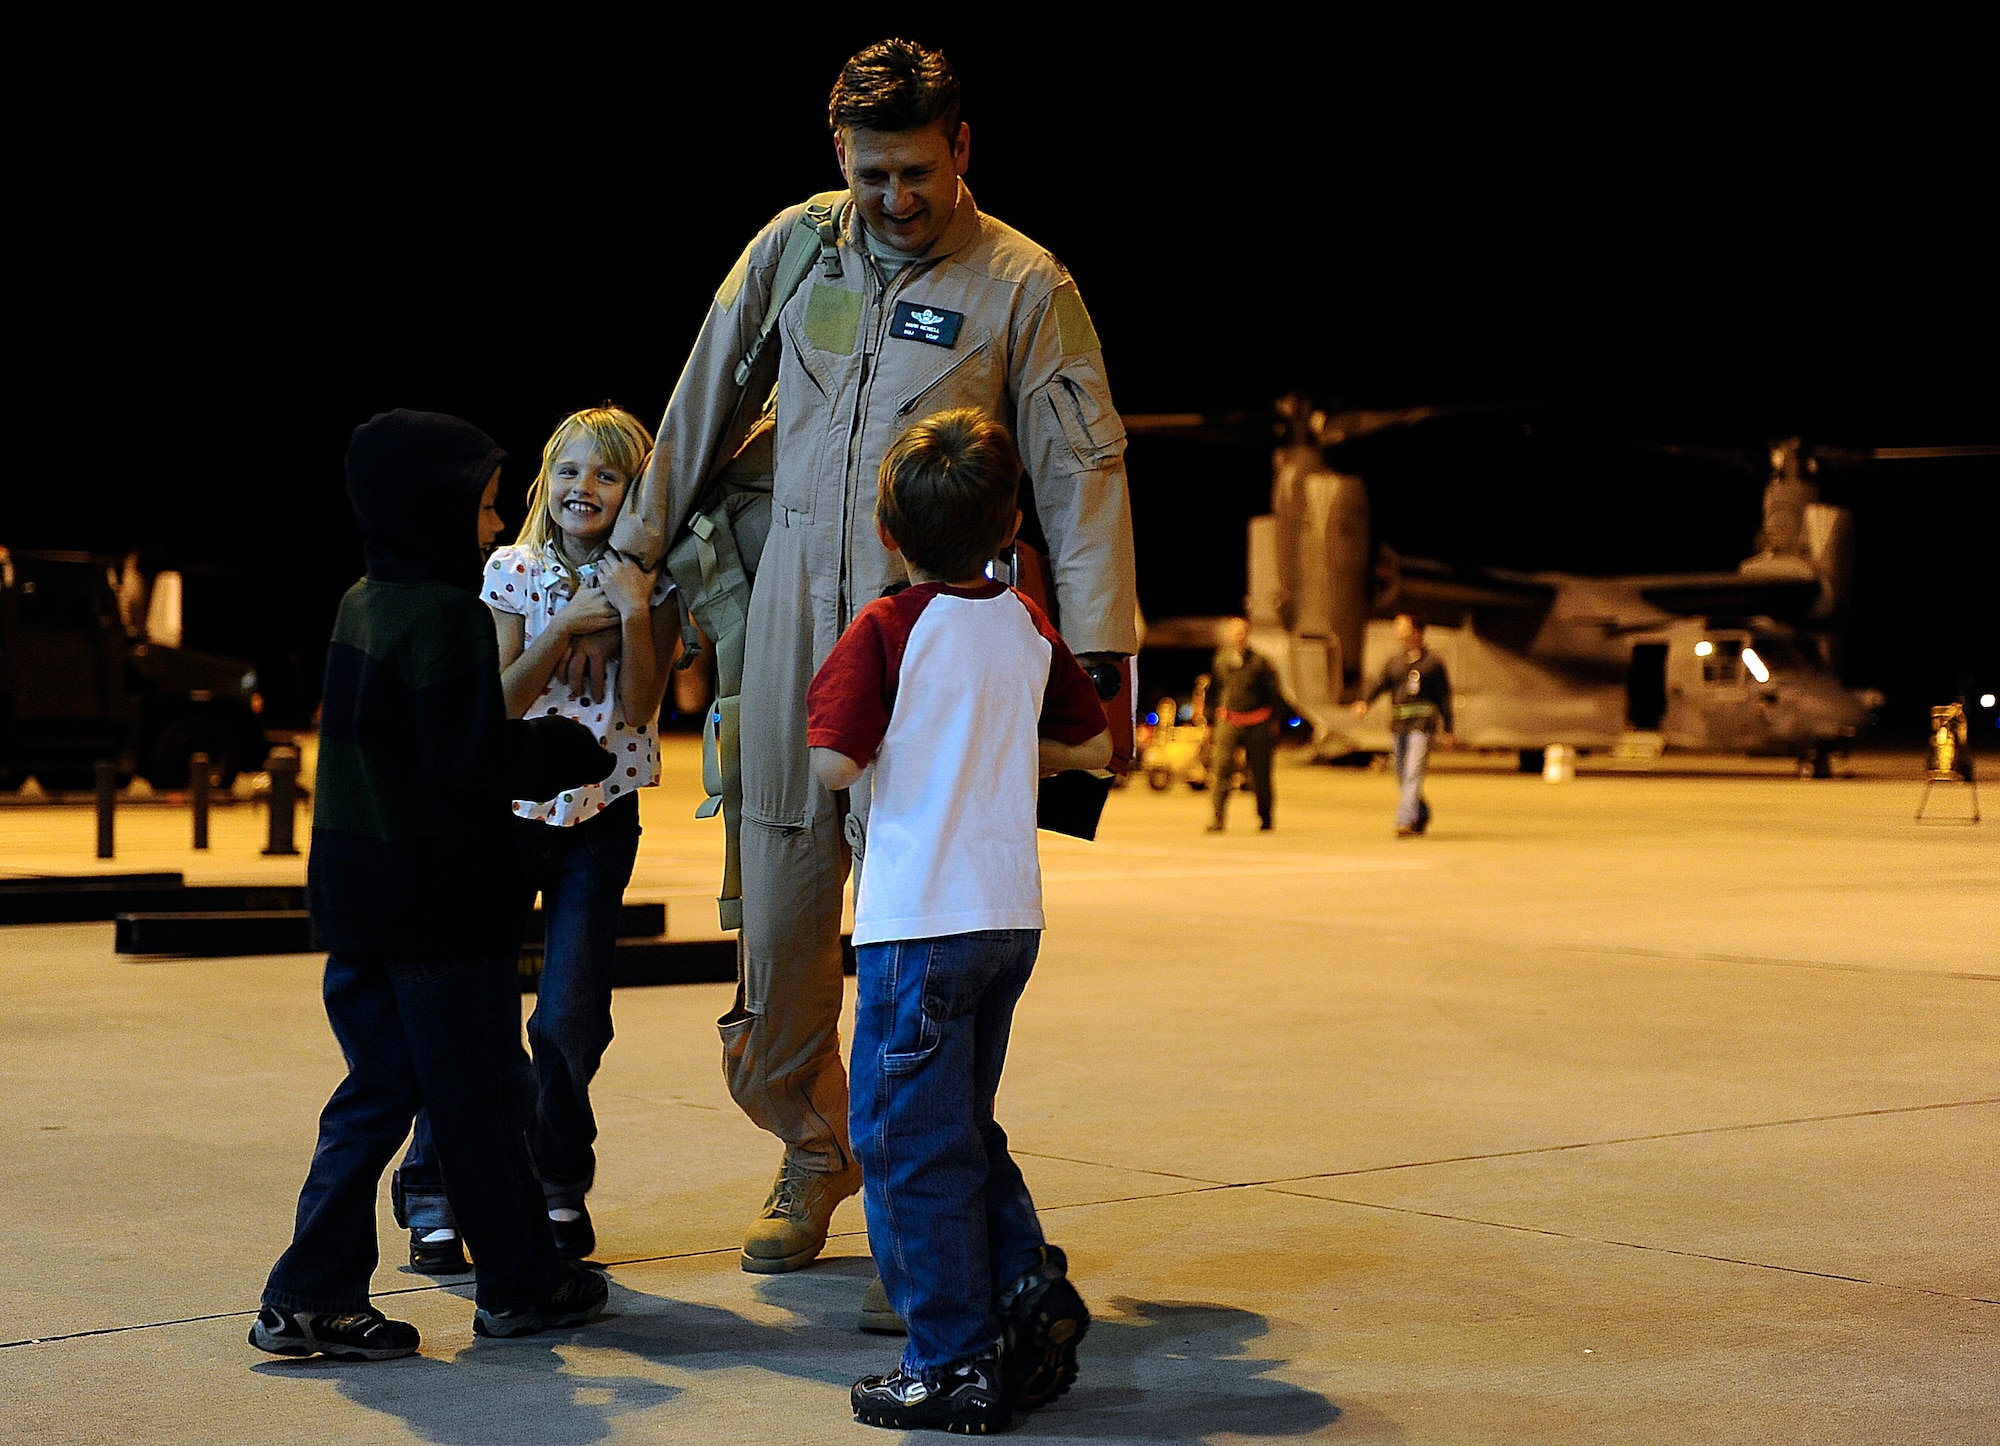 Maj. Mark Newell, 8th Special Operations Squadron, greets his family Nov. 12, 2009, Hurlburt Field, Fla. Major Newell returned from a three-month deployment to Southwest Asia. (U.S. Air Force photo by Senior Airman Julianne Showalter/Released)